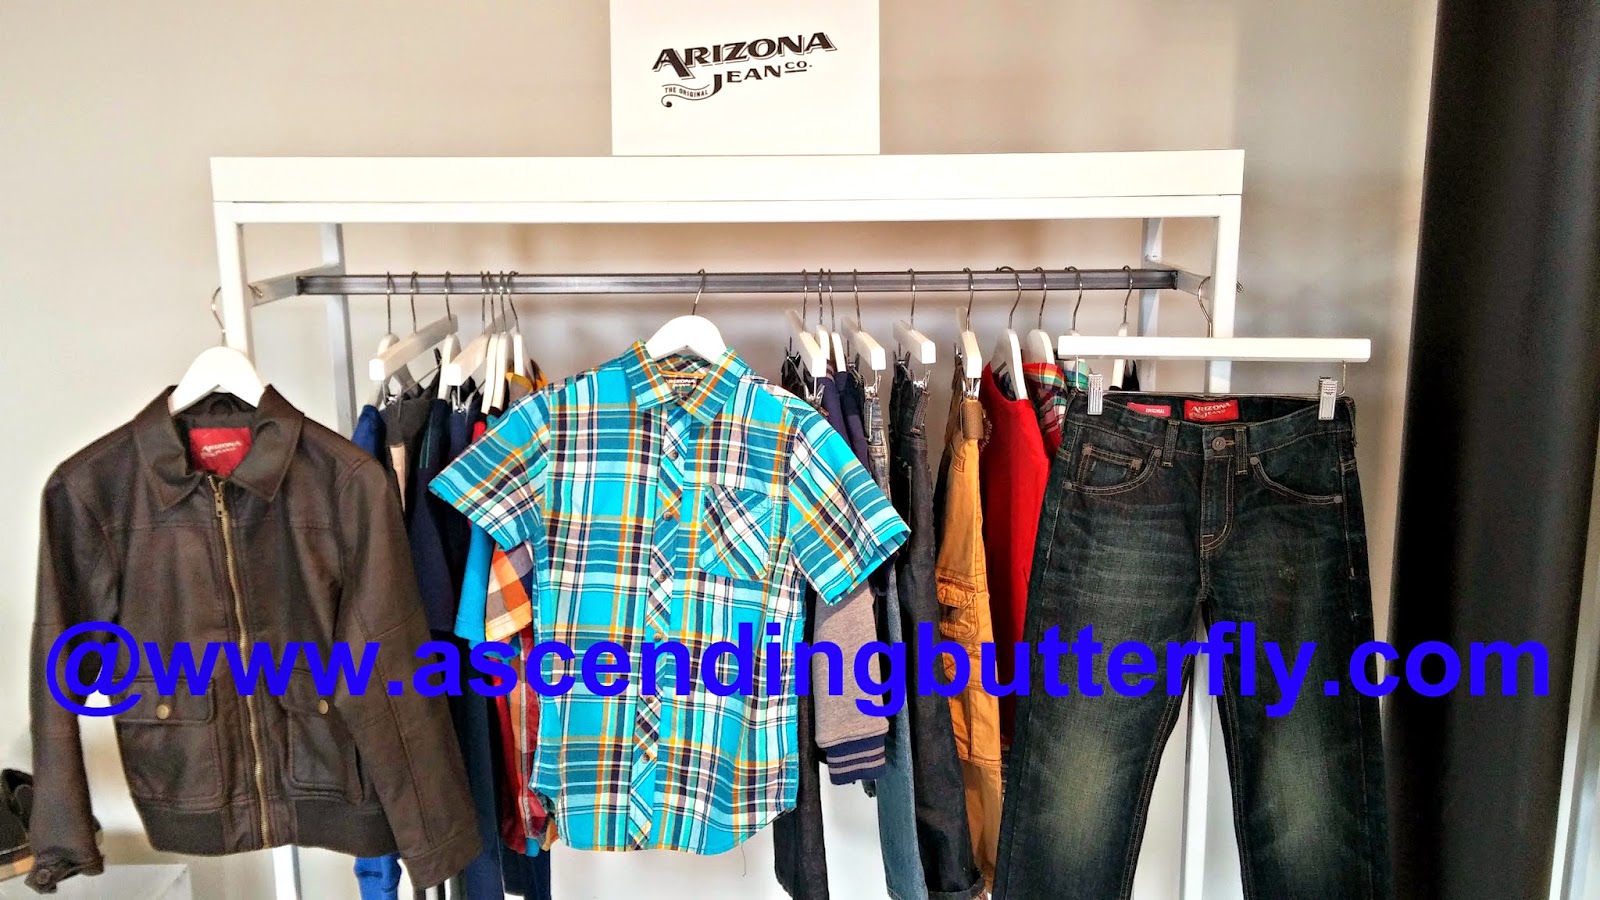 Arizona Jeans for Boys via JCPenney 2014 Back-to-School Press Preview, boys clothing, Arizona Jeans for Men